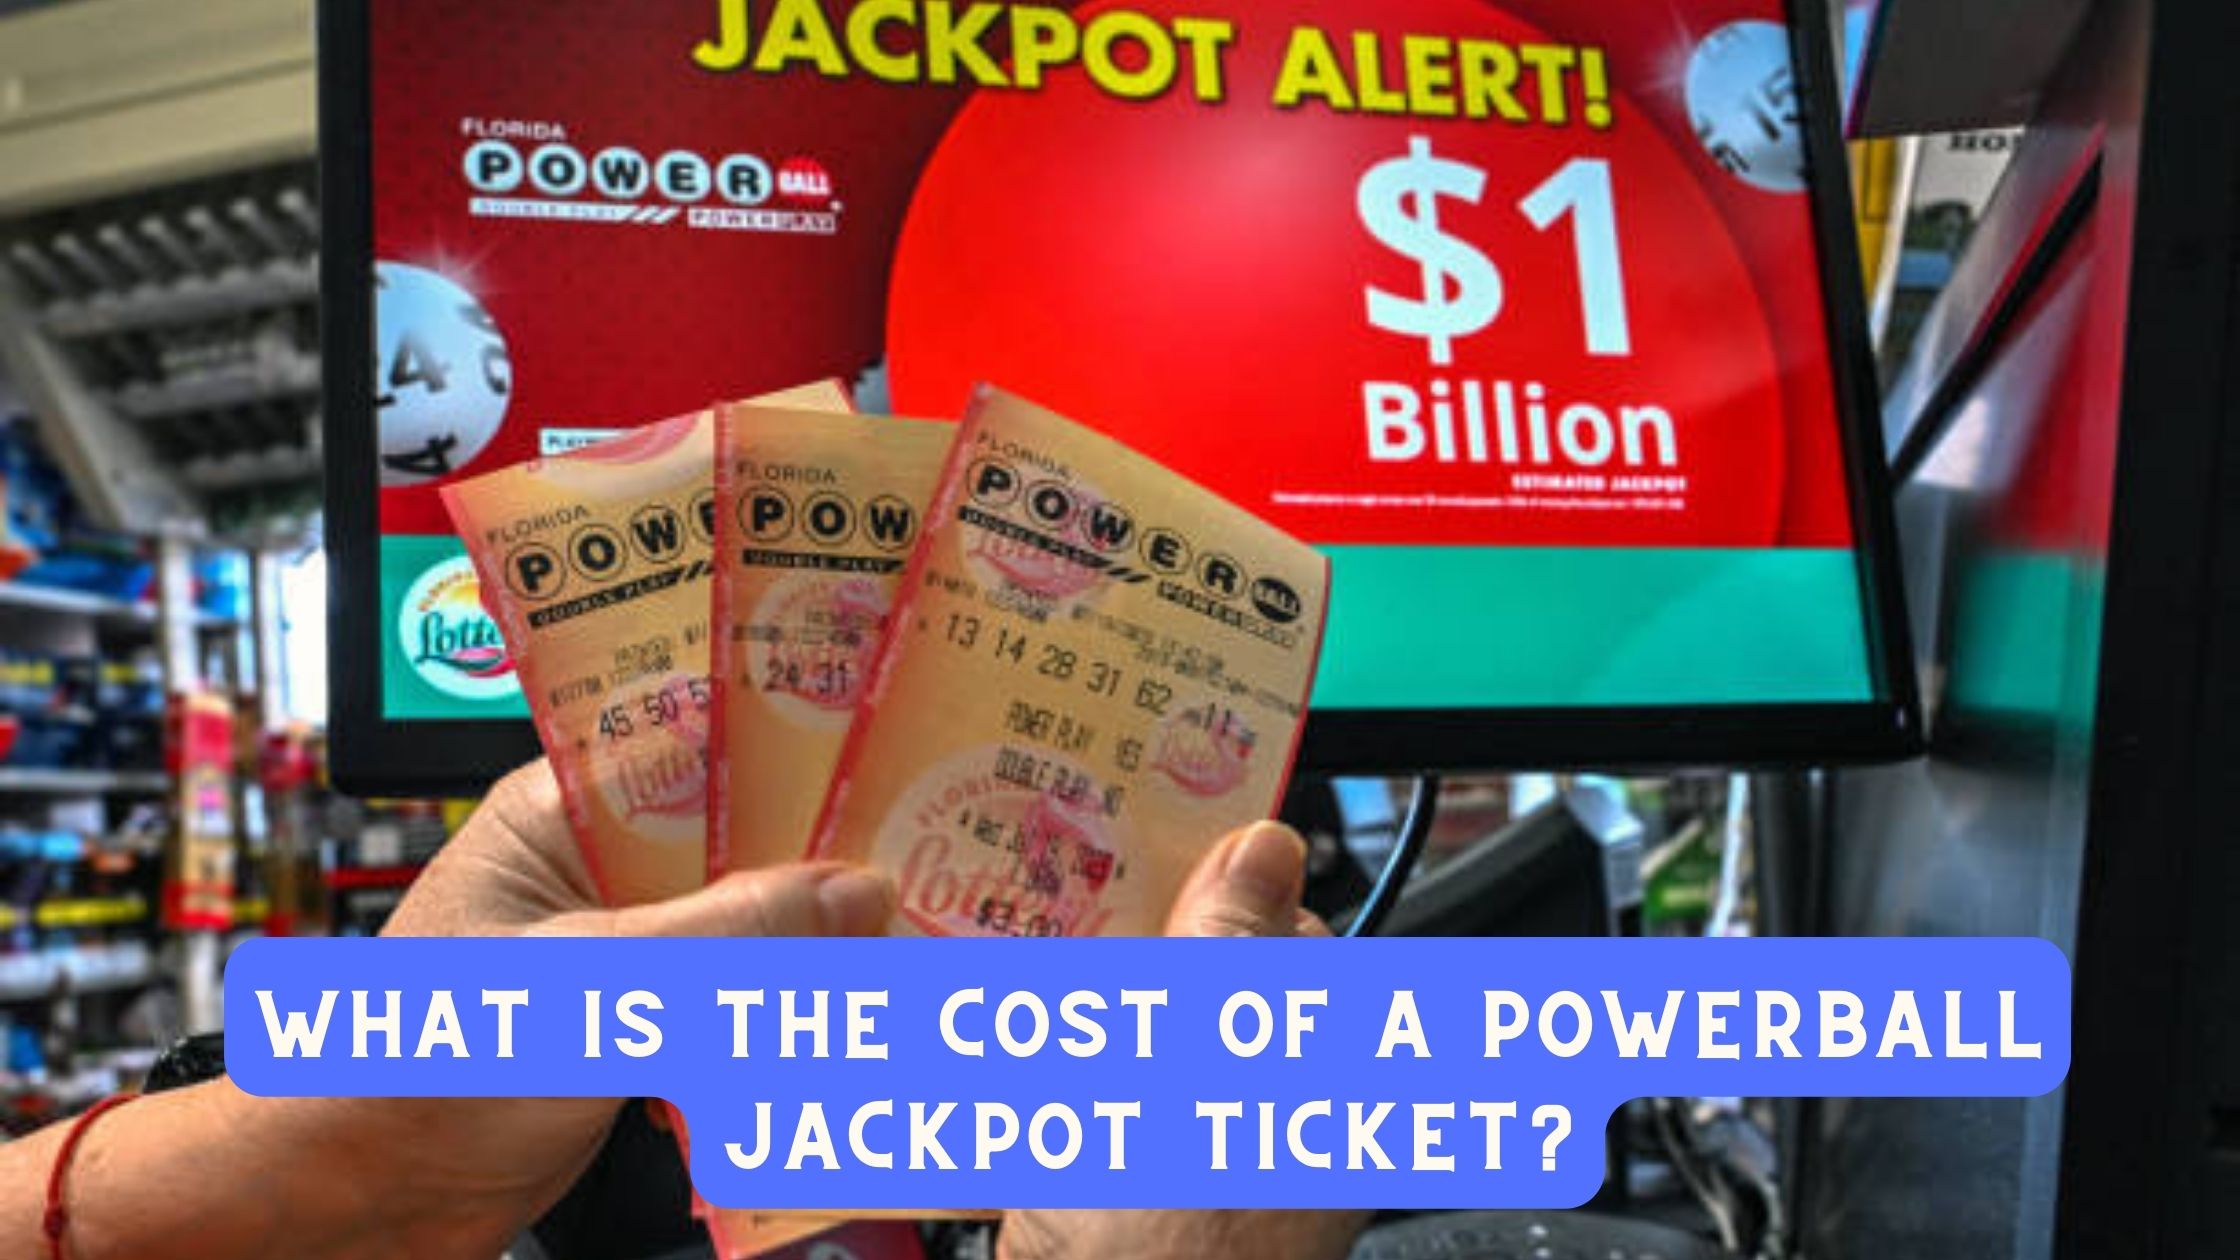 What is the cost of a Powerball Jackpot ticket?